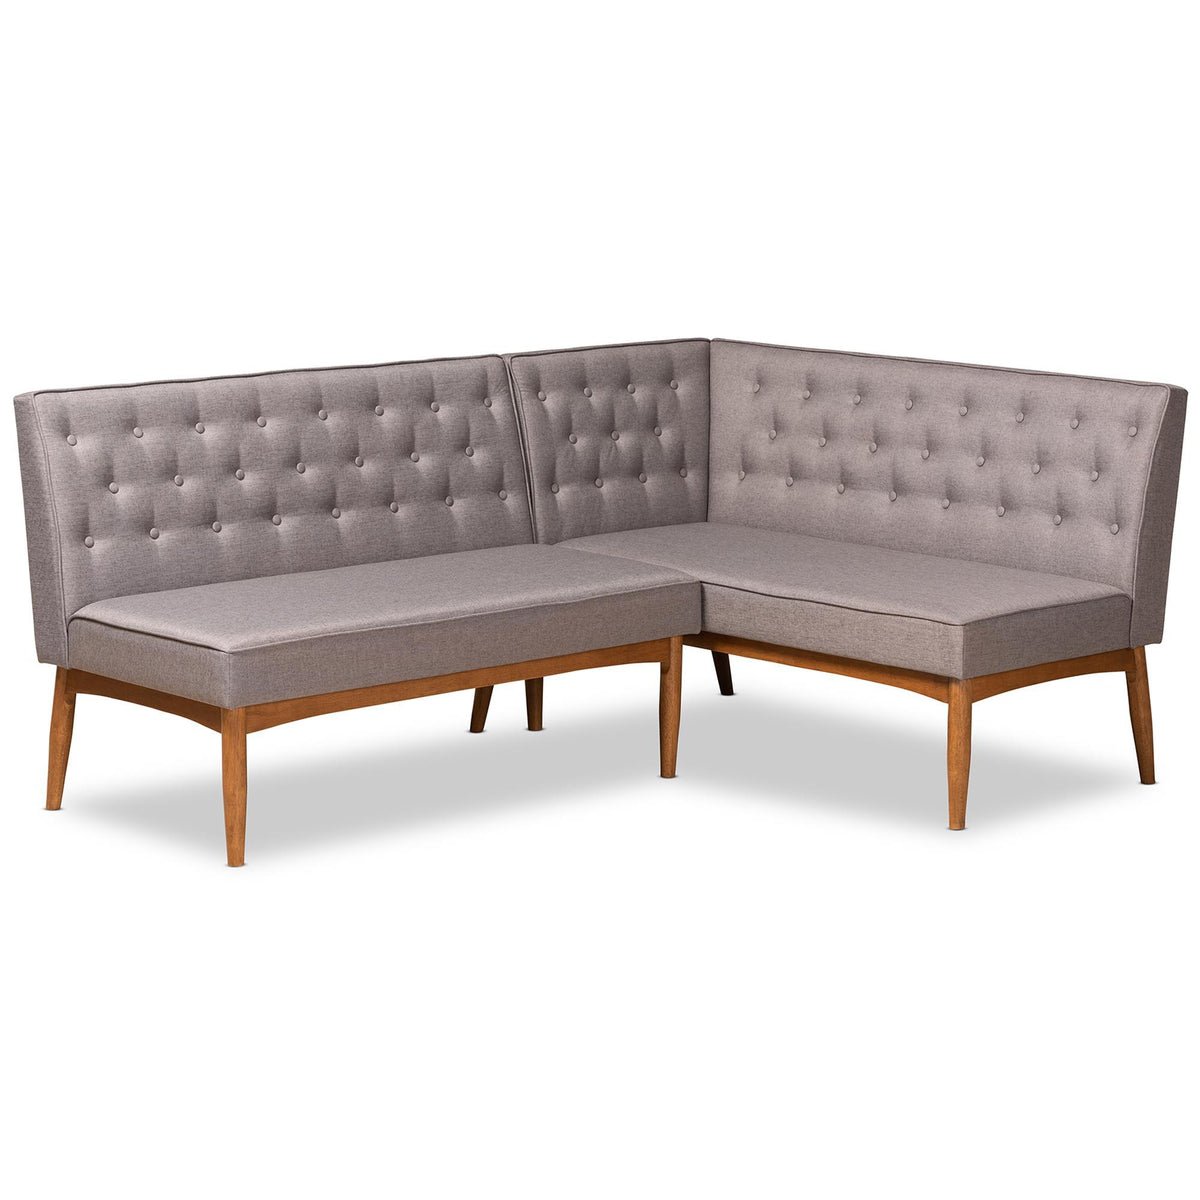 Baxton Studio Riordan Mid-Century Modern Grey Fabric Upholstered And Walnut Brown Finished Wood 2-Piece Dining Nook Banquette Set - BBT8051.13-Grey/Walnut-2PC SF Bench